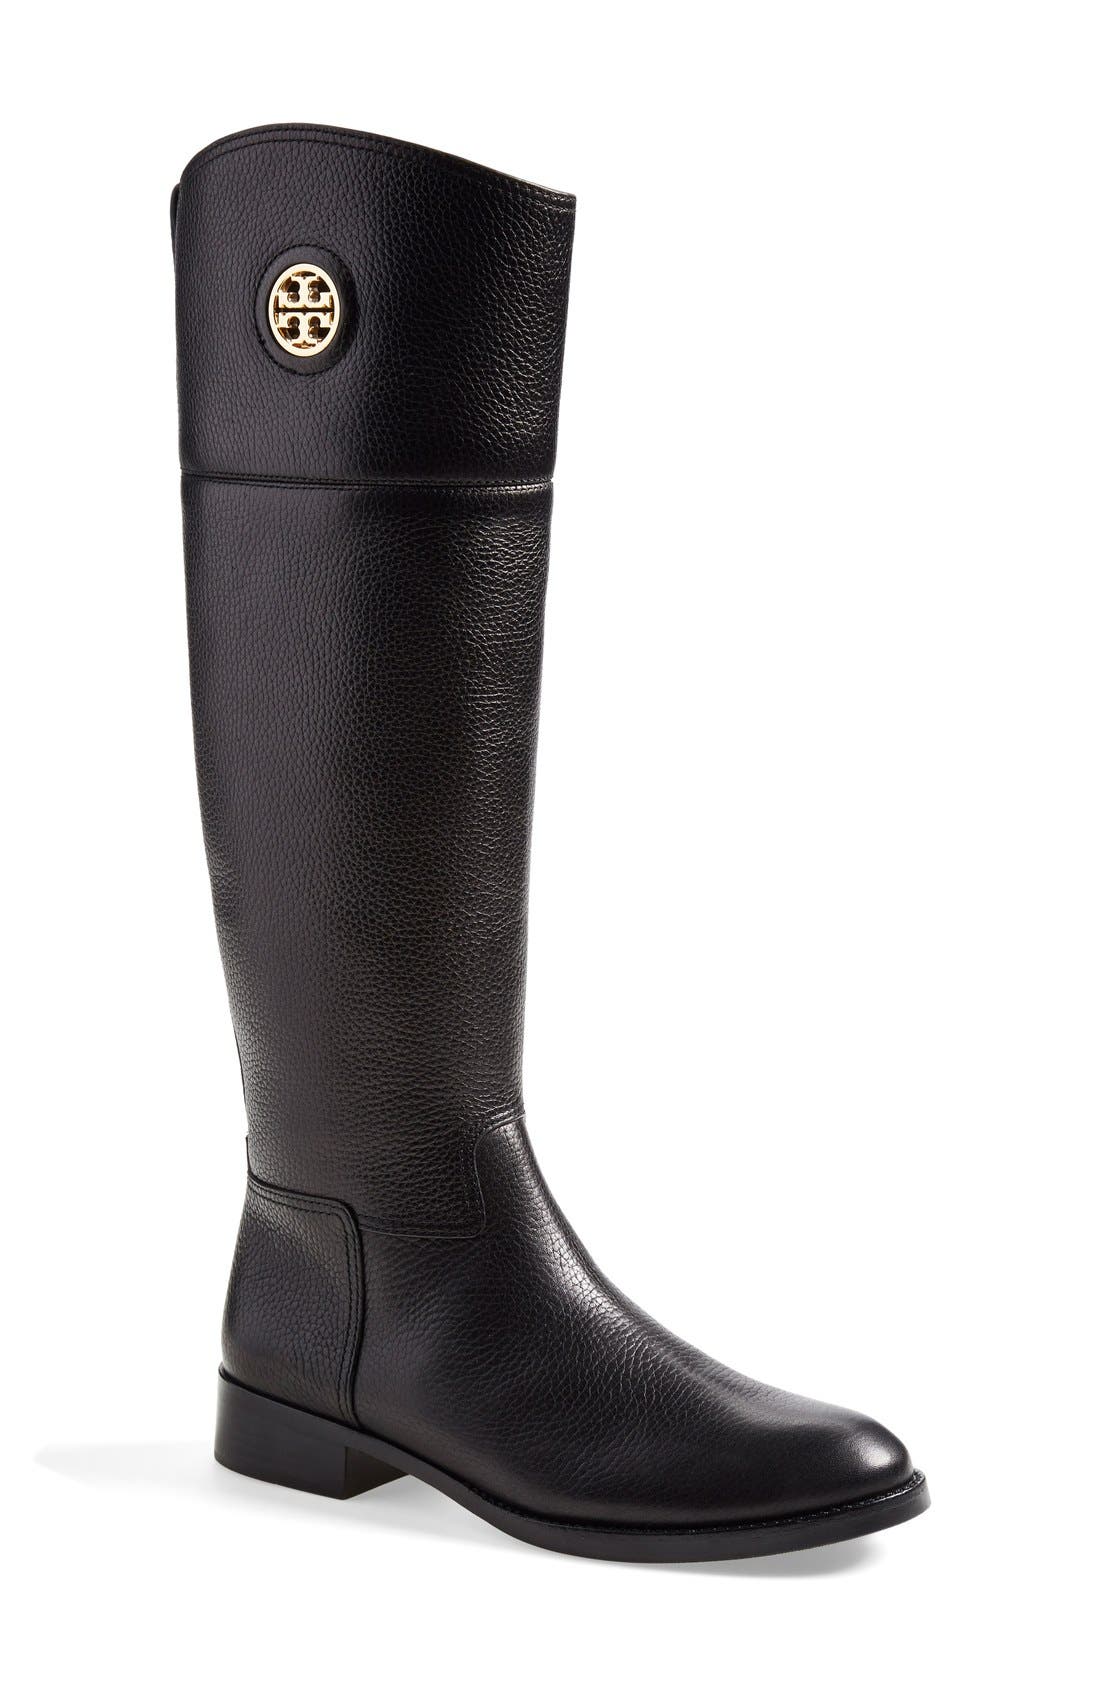 Tory Burch 'Junction' Riding Boot 